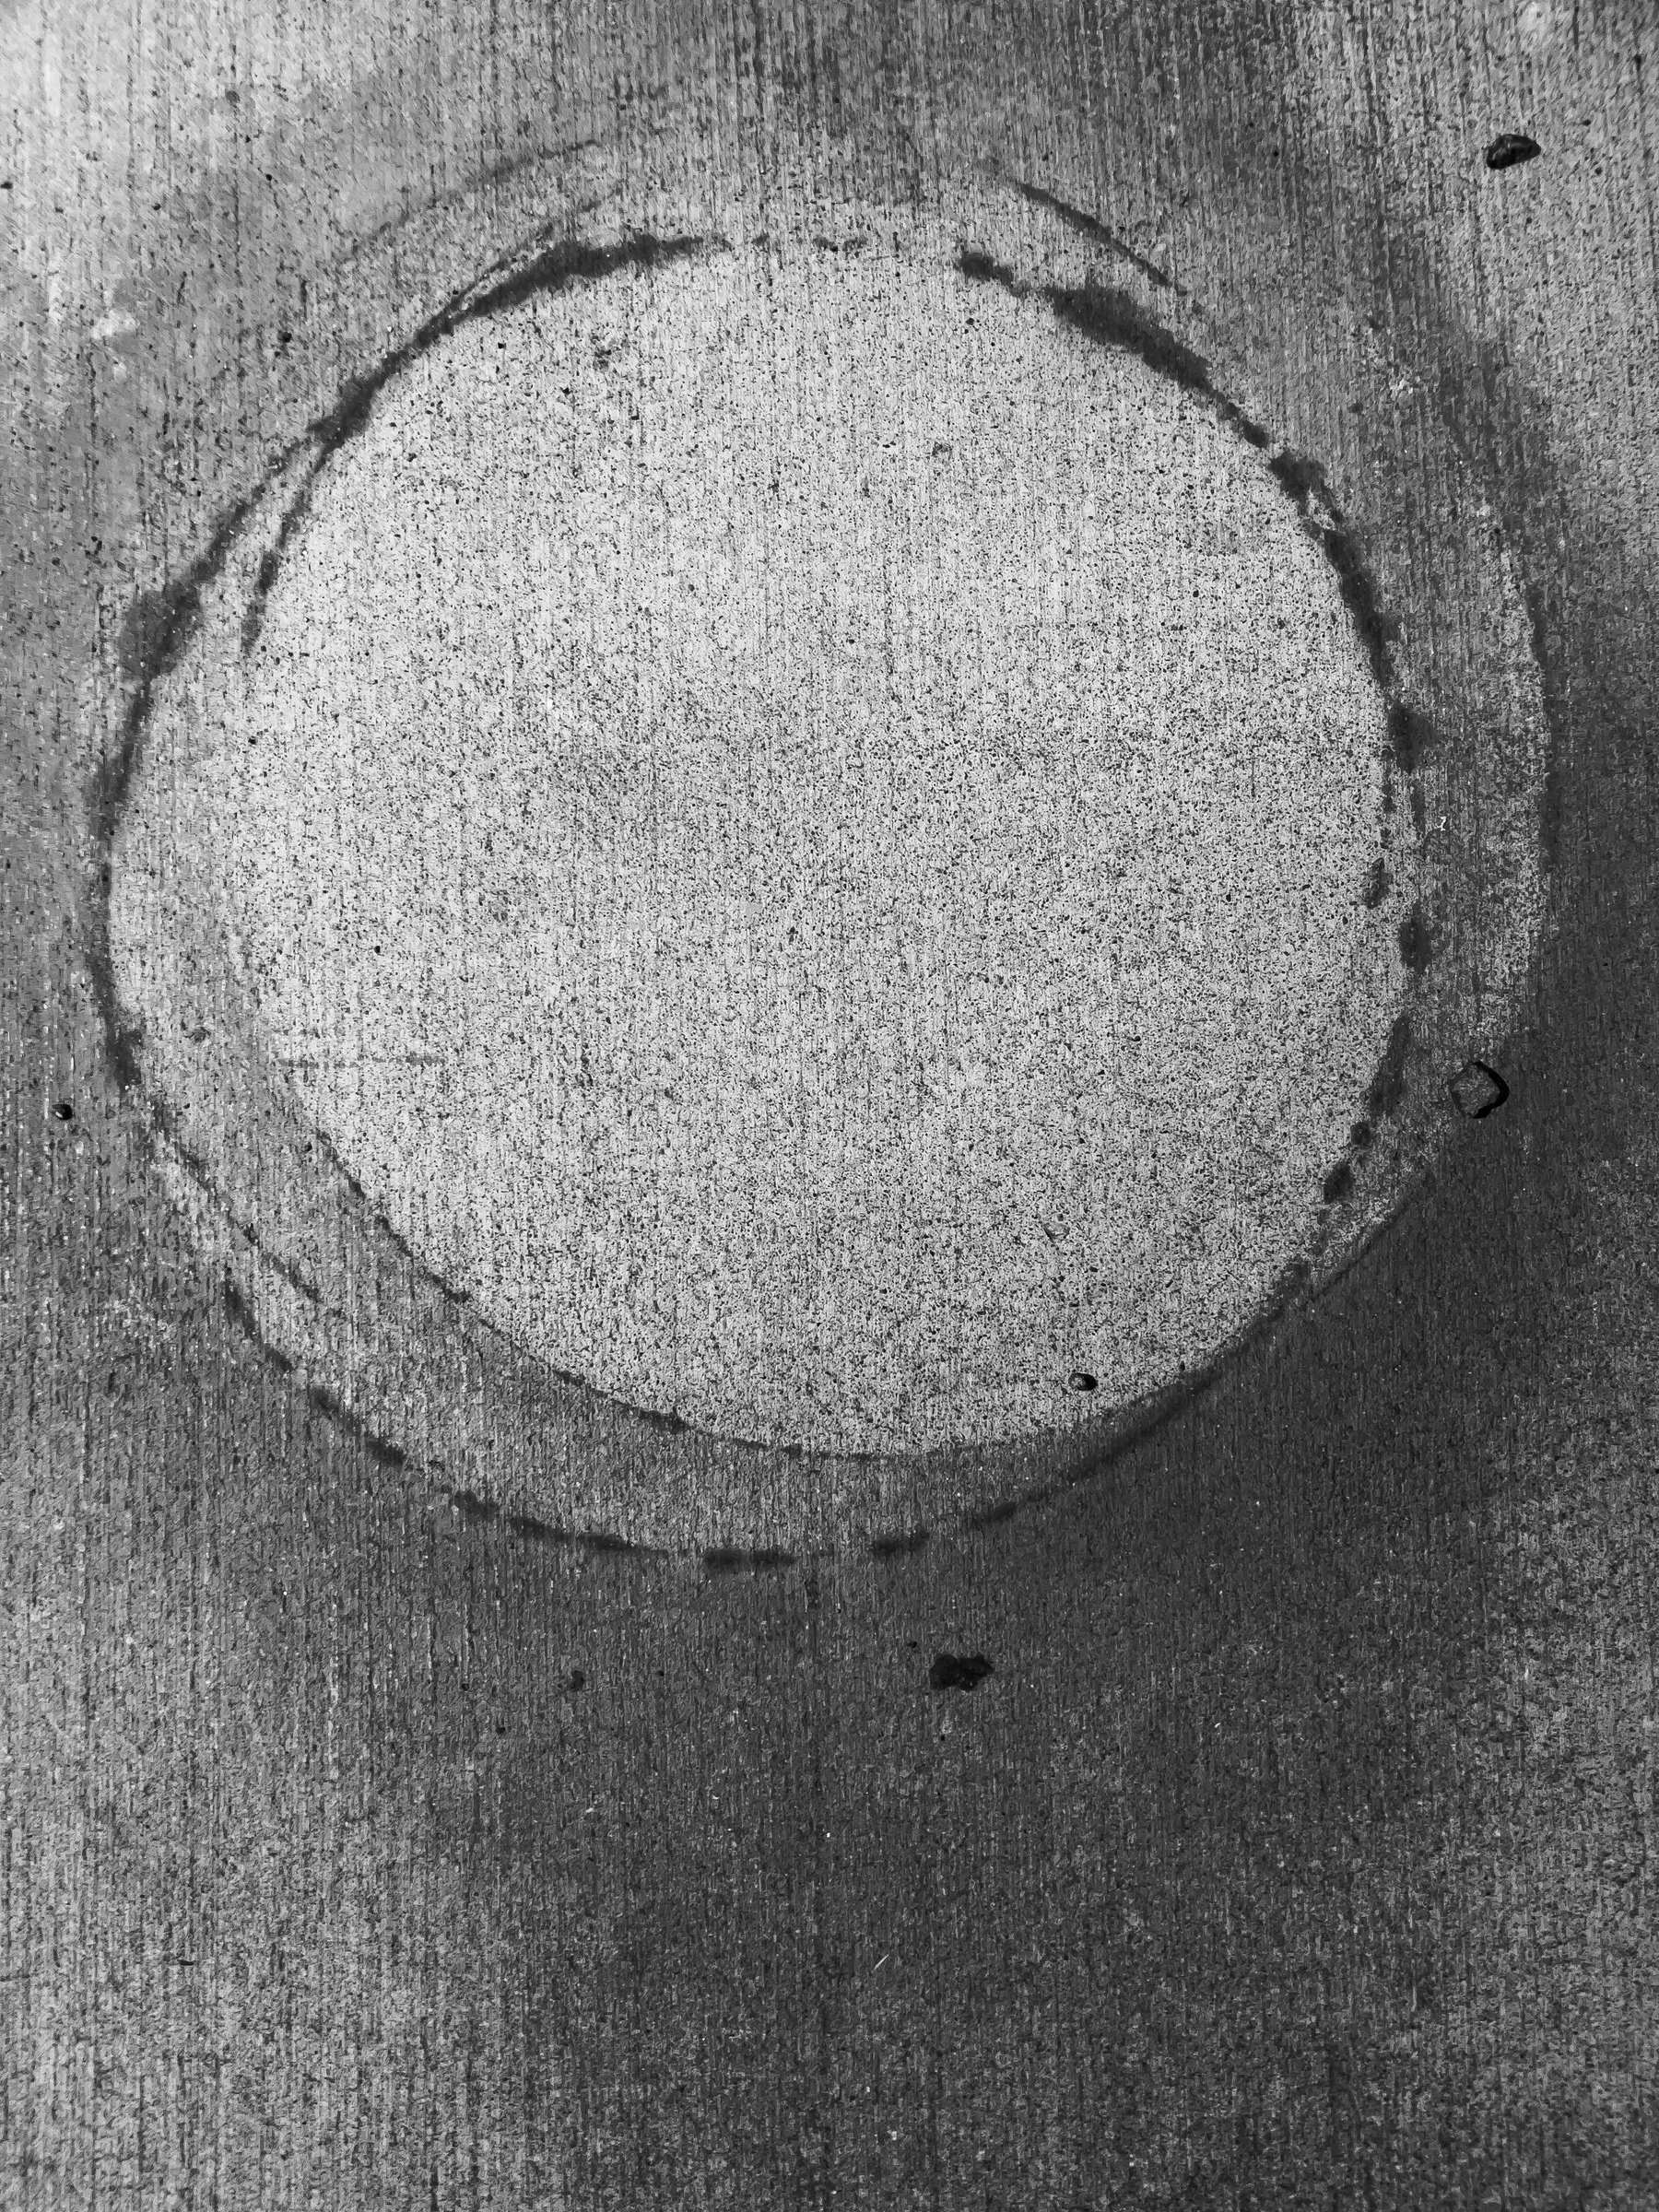 Overlapping circular stains on concrete positioned equally distant from top and sides of vertical rectangular frame. 